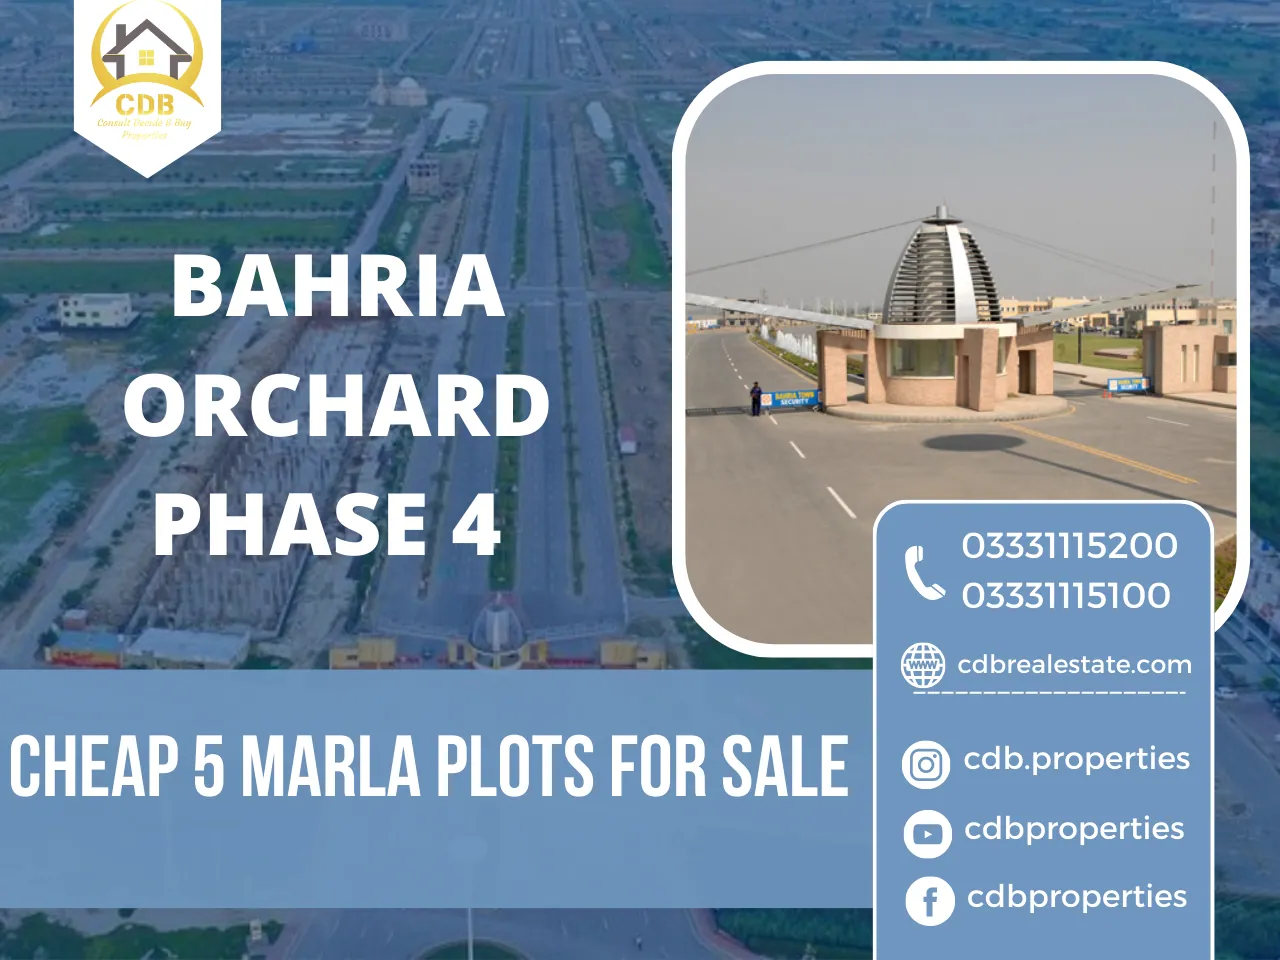 Cheap 5 Marla plots for sale in Bahria Orchard